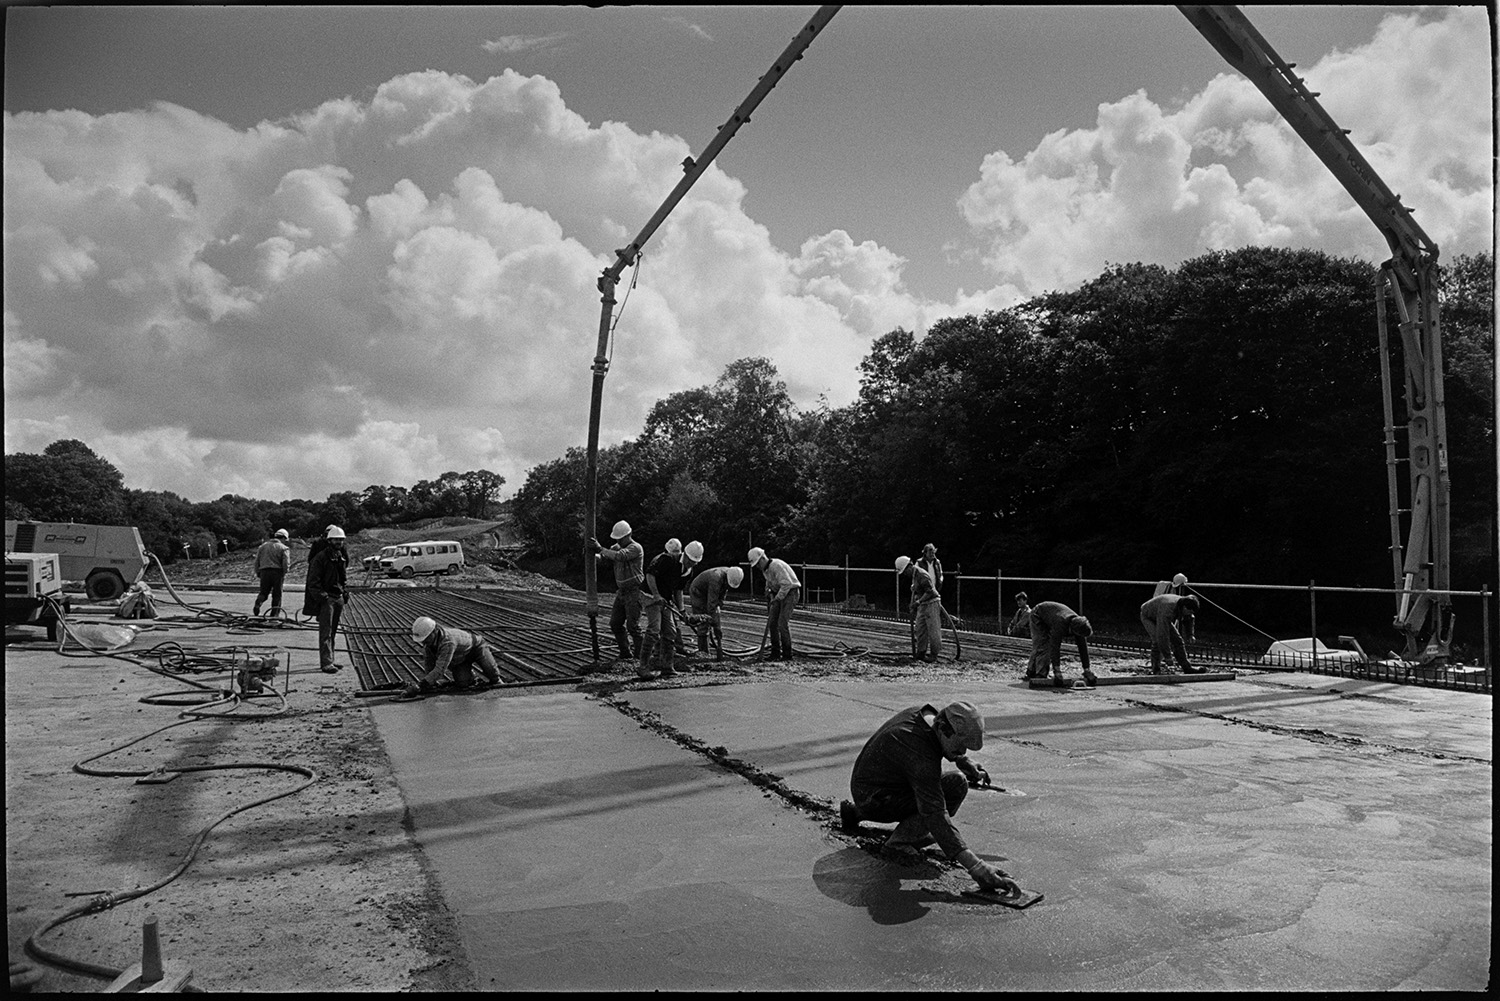 Men building new link road laying cement delivered by crane, sun and cloud. 
[Men laying cement over metal mesh on the Devon Link Road or A361. The cement is being delivered by a crane. A man is the foreground is levelling the cement.]